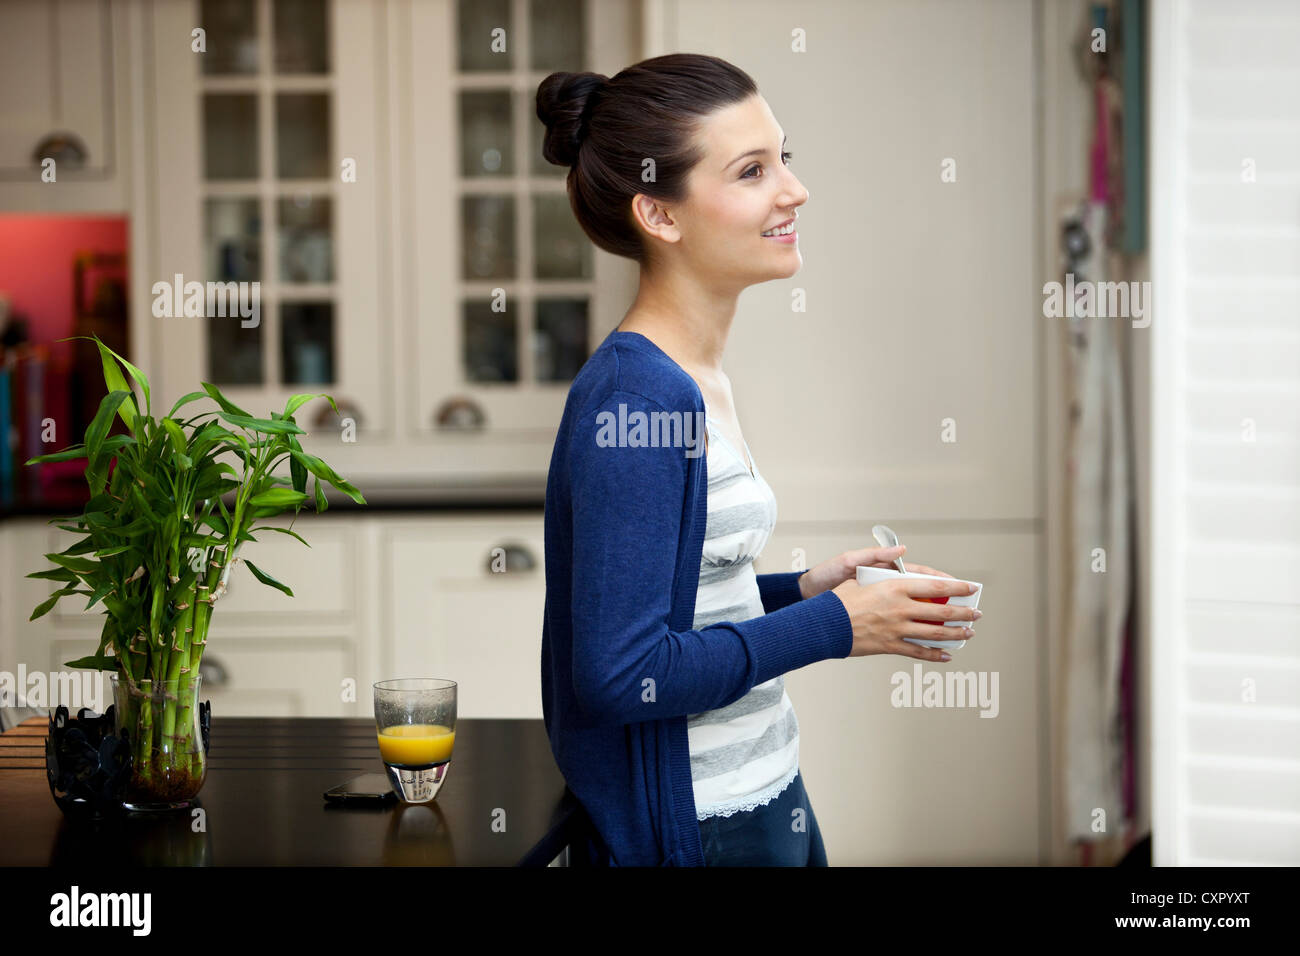 Young woman eating breakfast Stock Photo